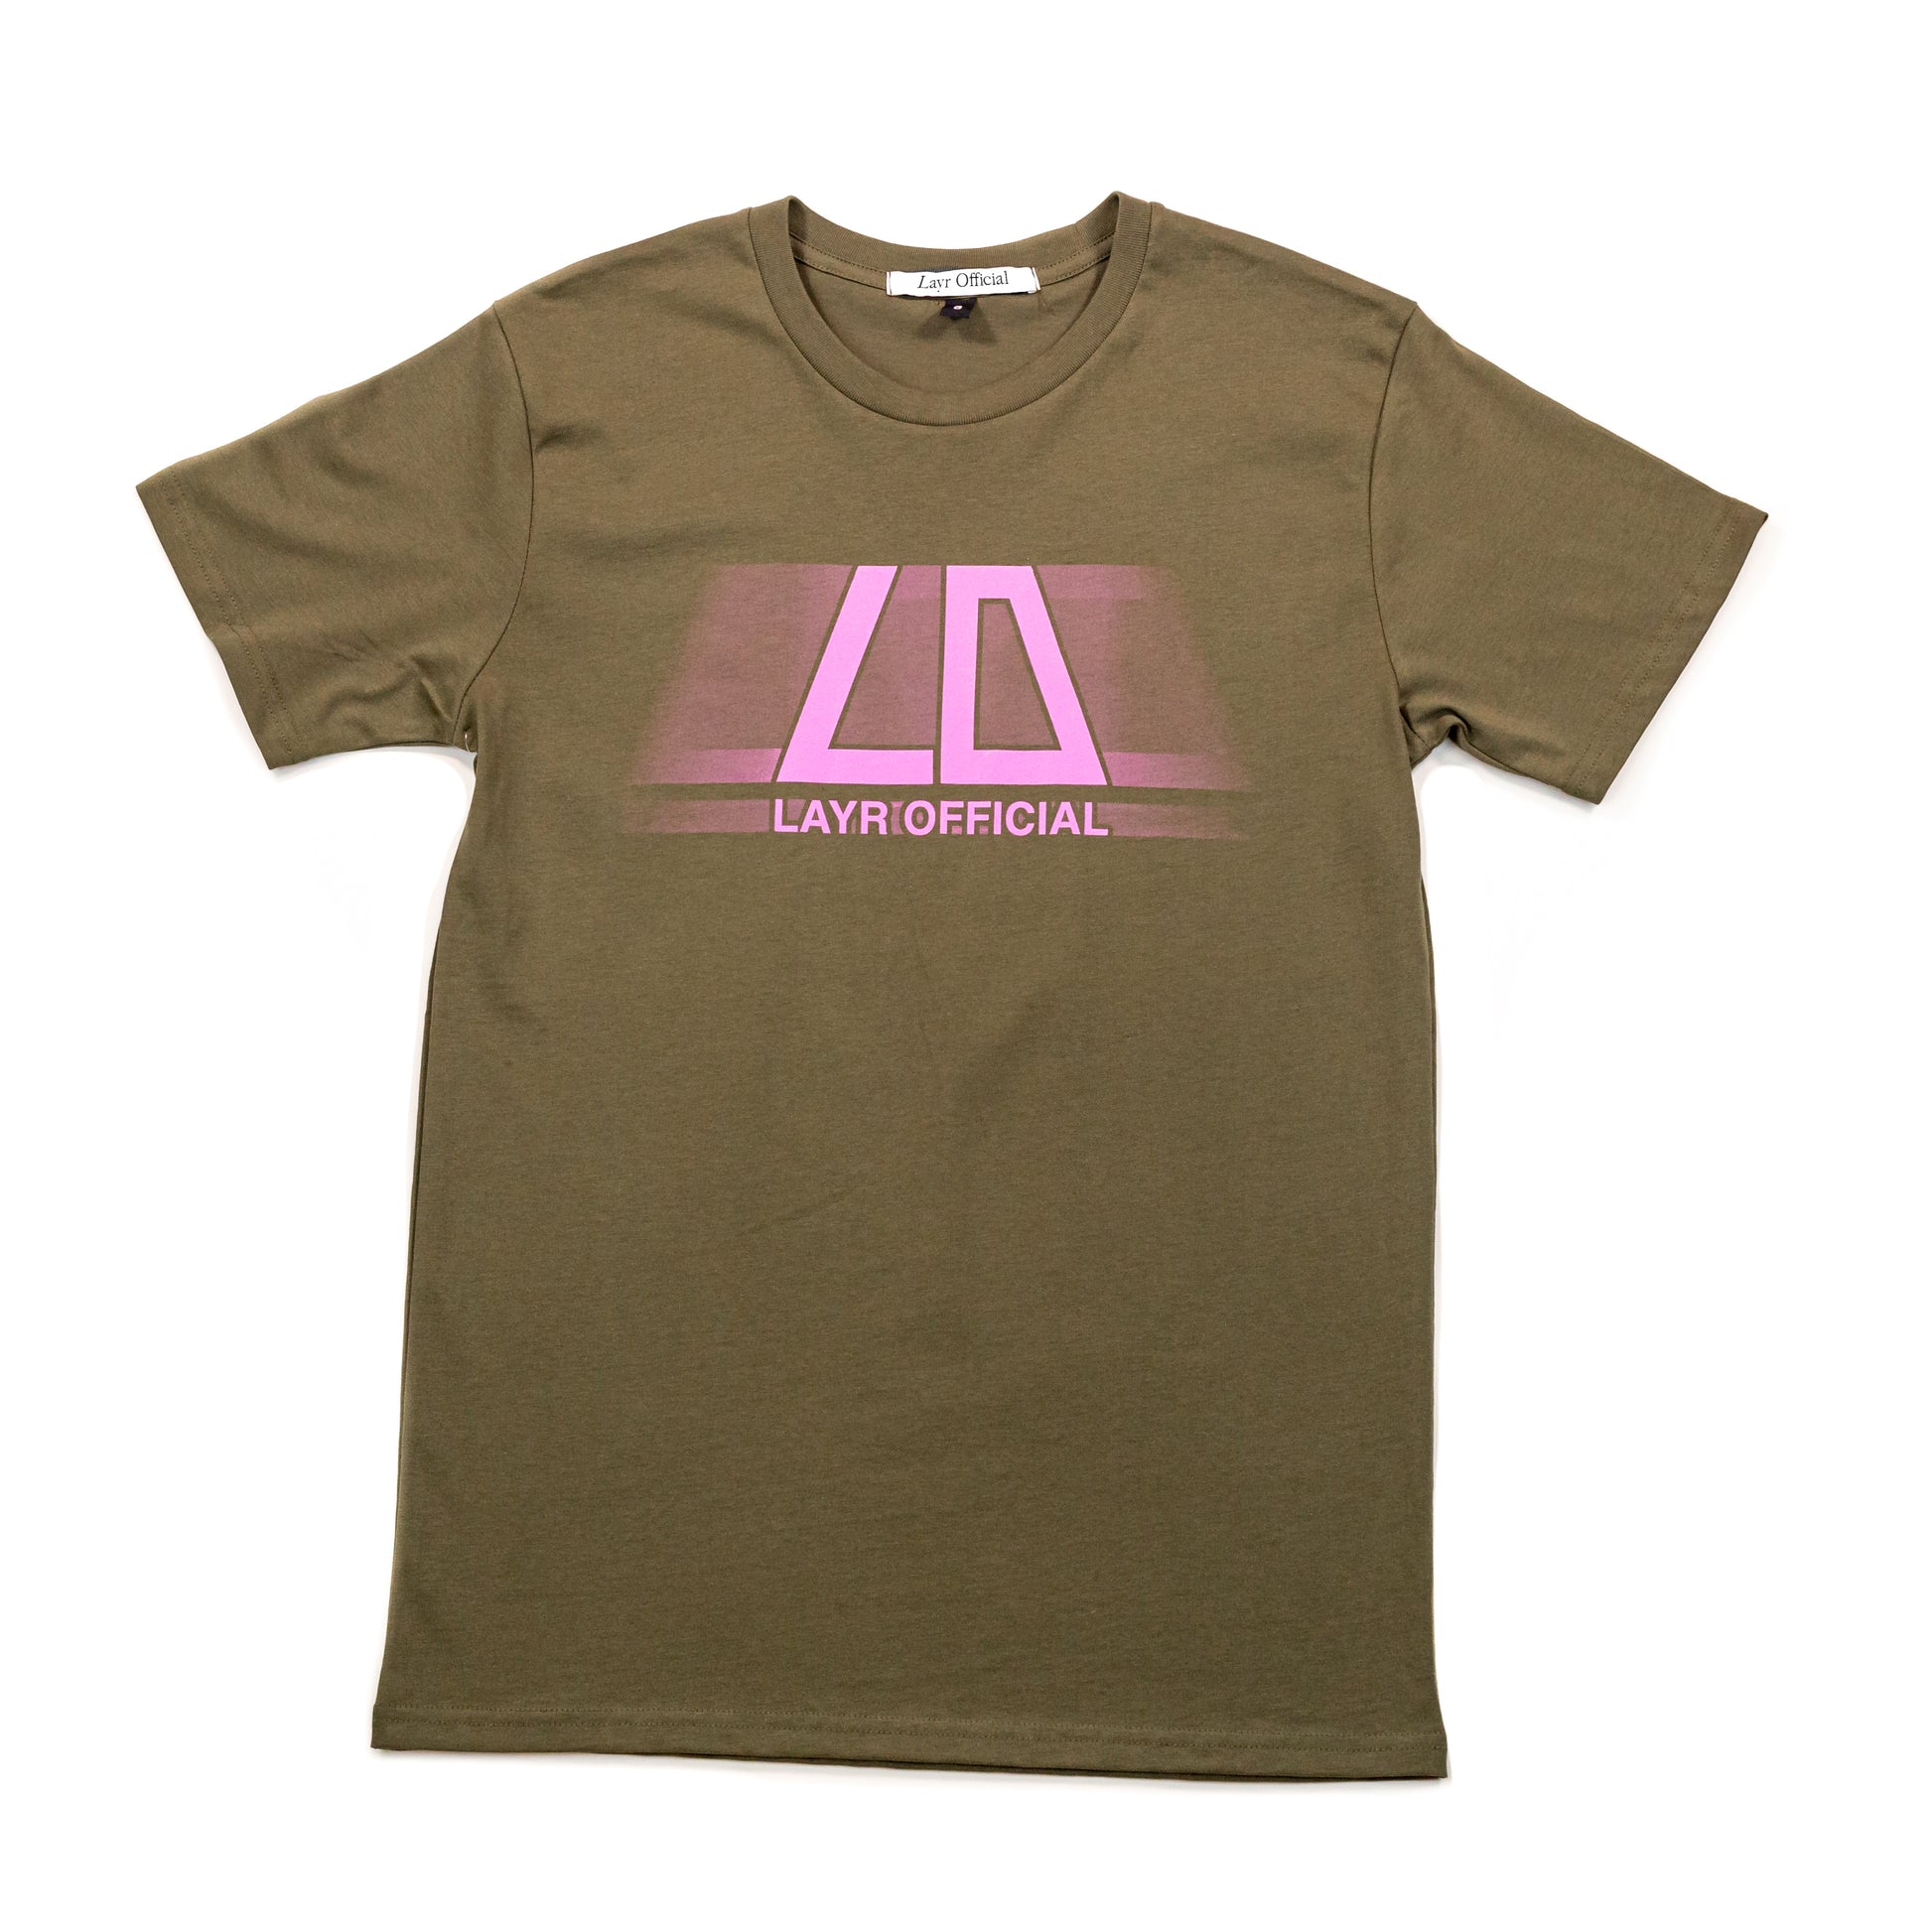 Layr Official Blur Tee, Army/Pink - Layr Official